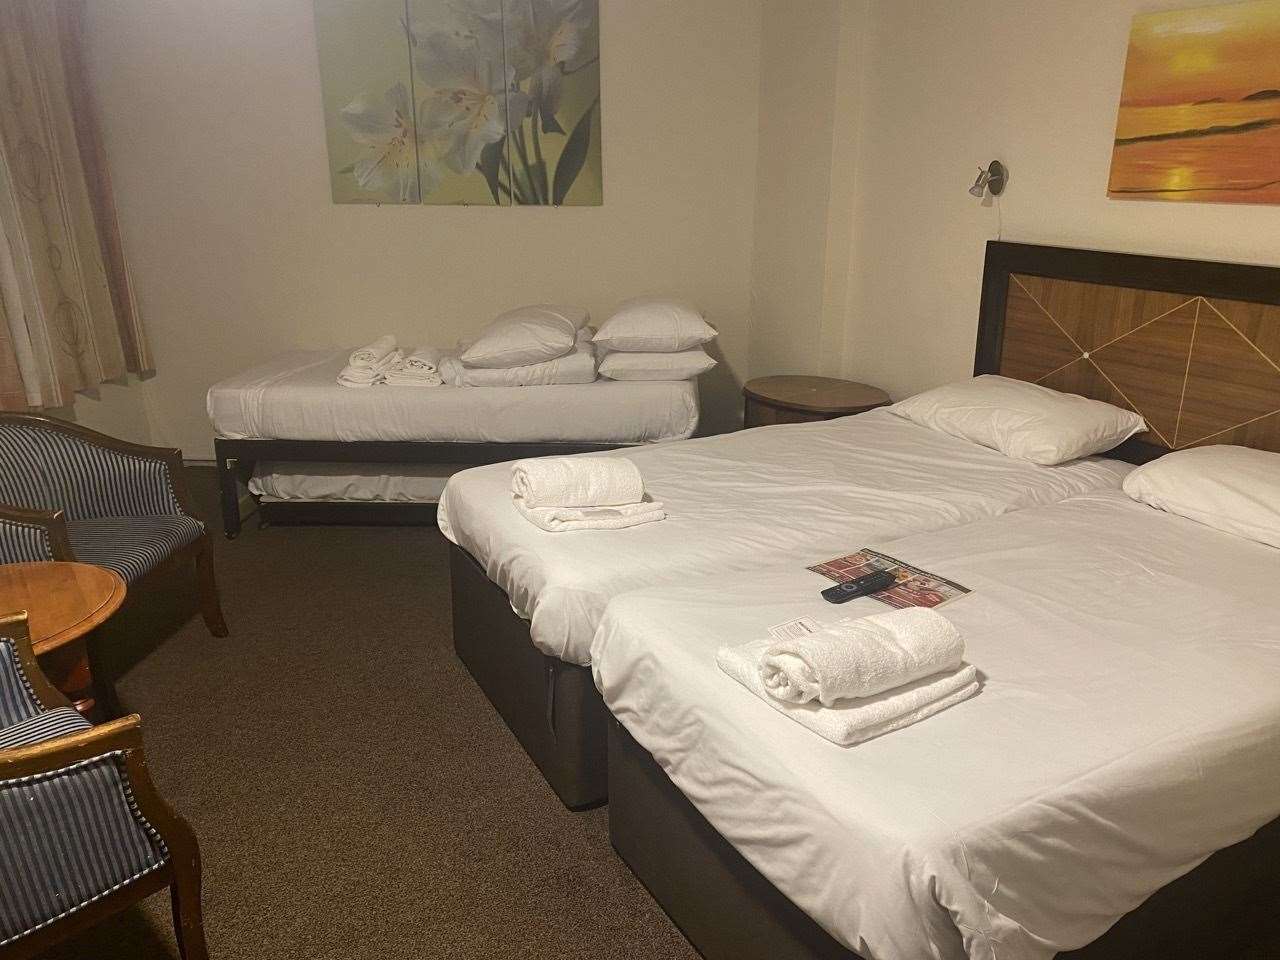 The beds were pretty hard but I appreciated the clean sheets and extra pillows